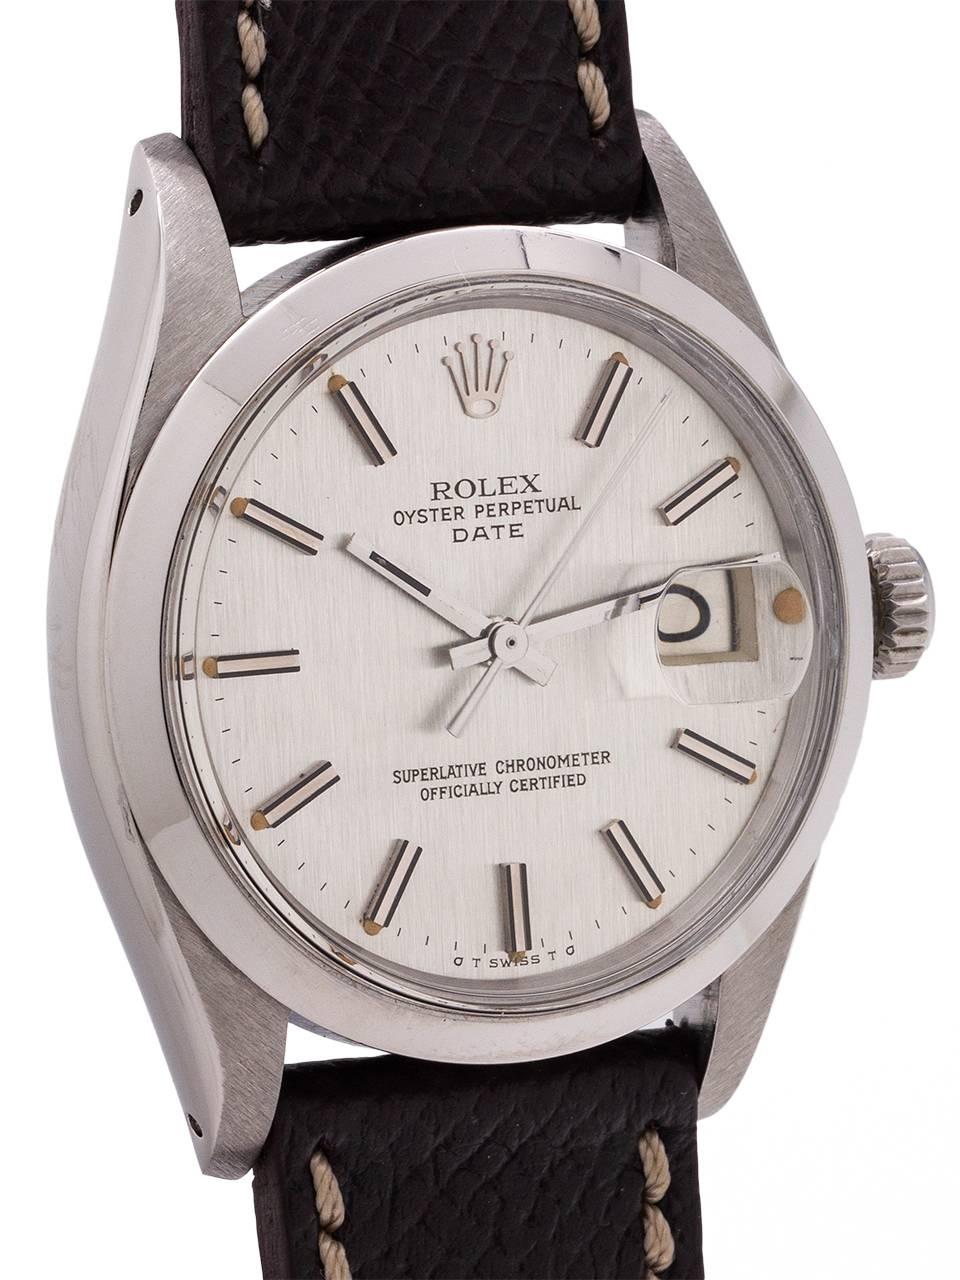 
Rolex Oyster Perpetual Date ref 1500 circa 1970. Featuring 34mm diameter case with smooth bezel, acrylic crystal, and original anthracite gray “linen” texture dial with applied silver indexes, warmly patina’d luminous indexes, and silver baton